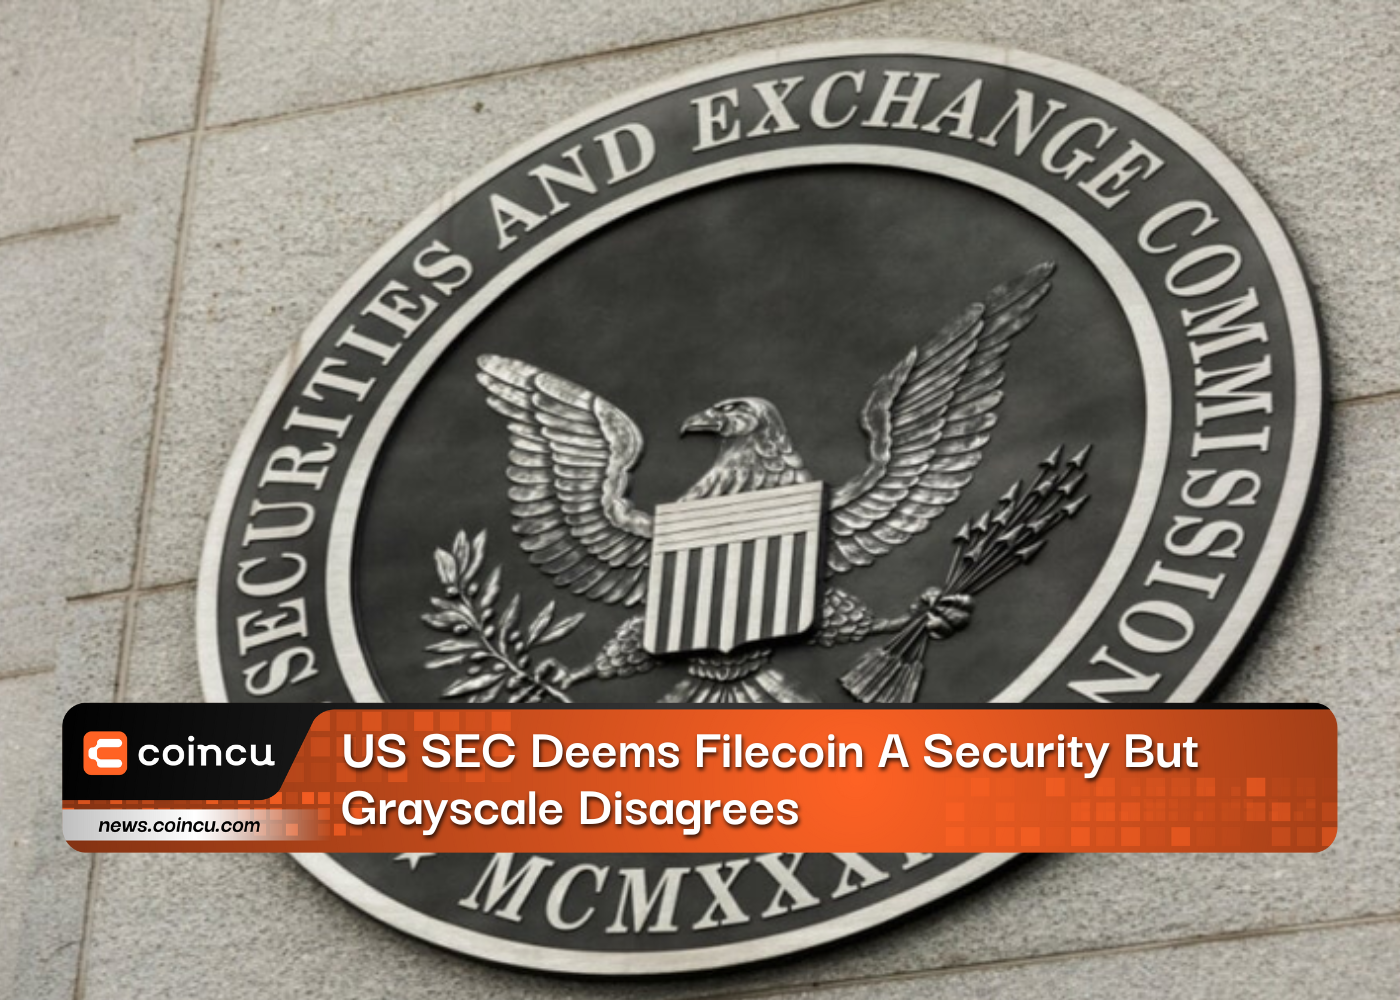 US SEC Deems Filecoin A Security But Grayscale Disagrees